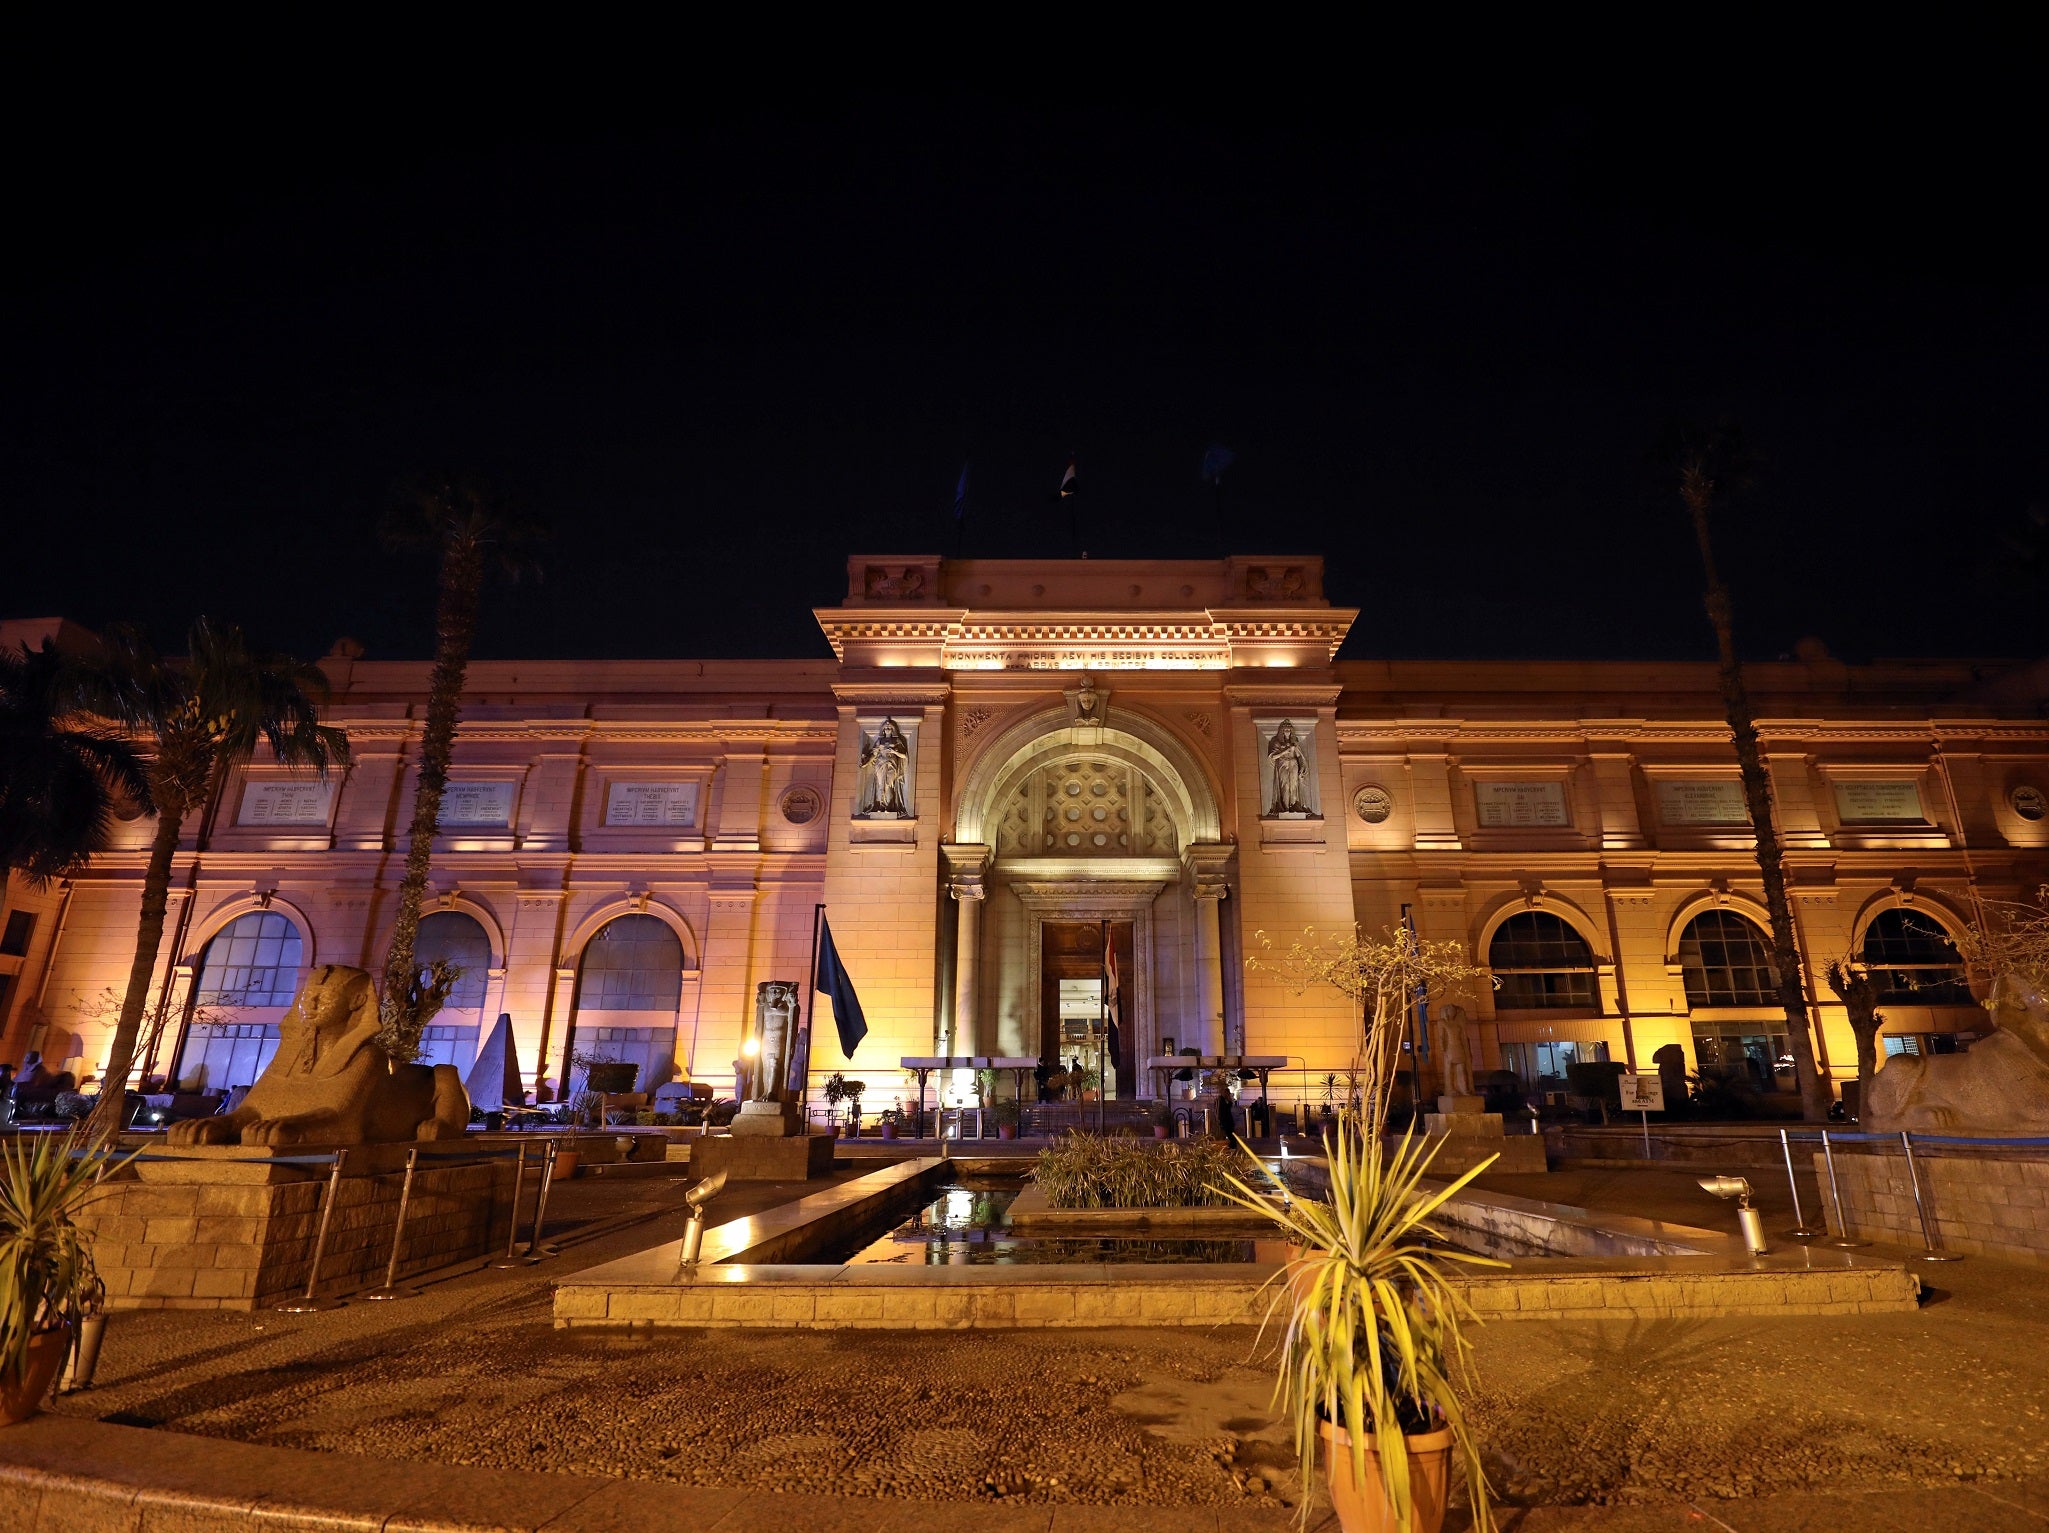 One historian believes King Solomon's wealth may in fact be in the Egyptian Museum in Cairo